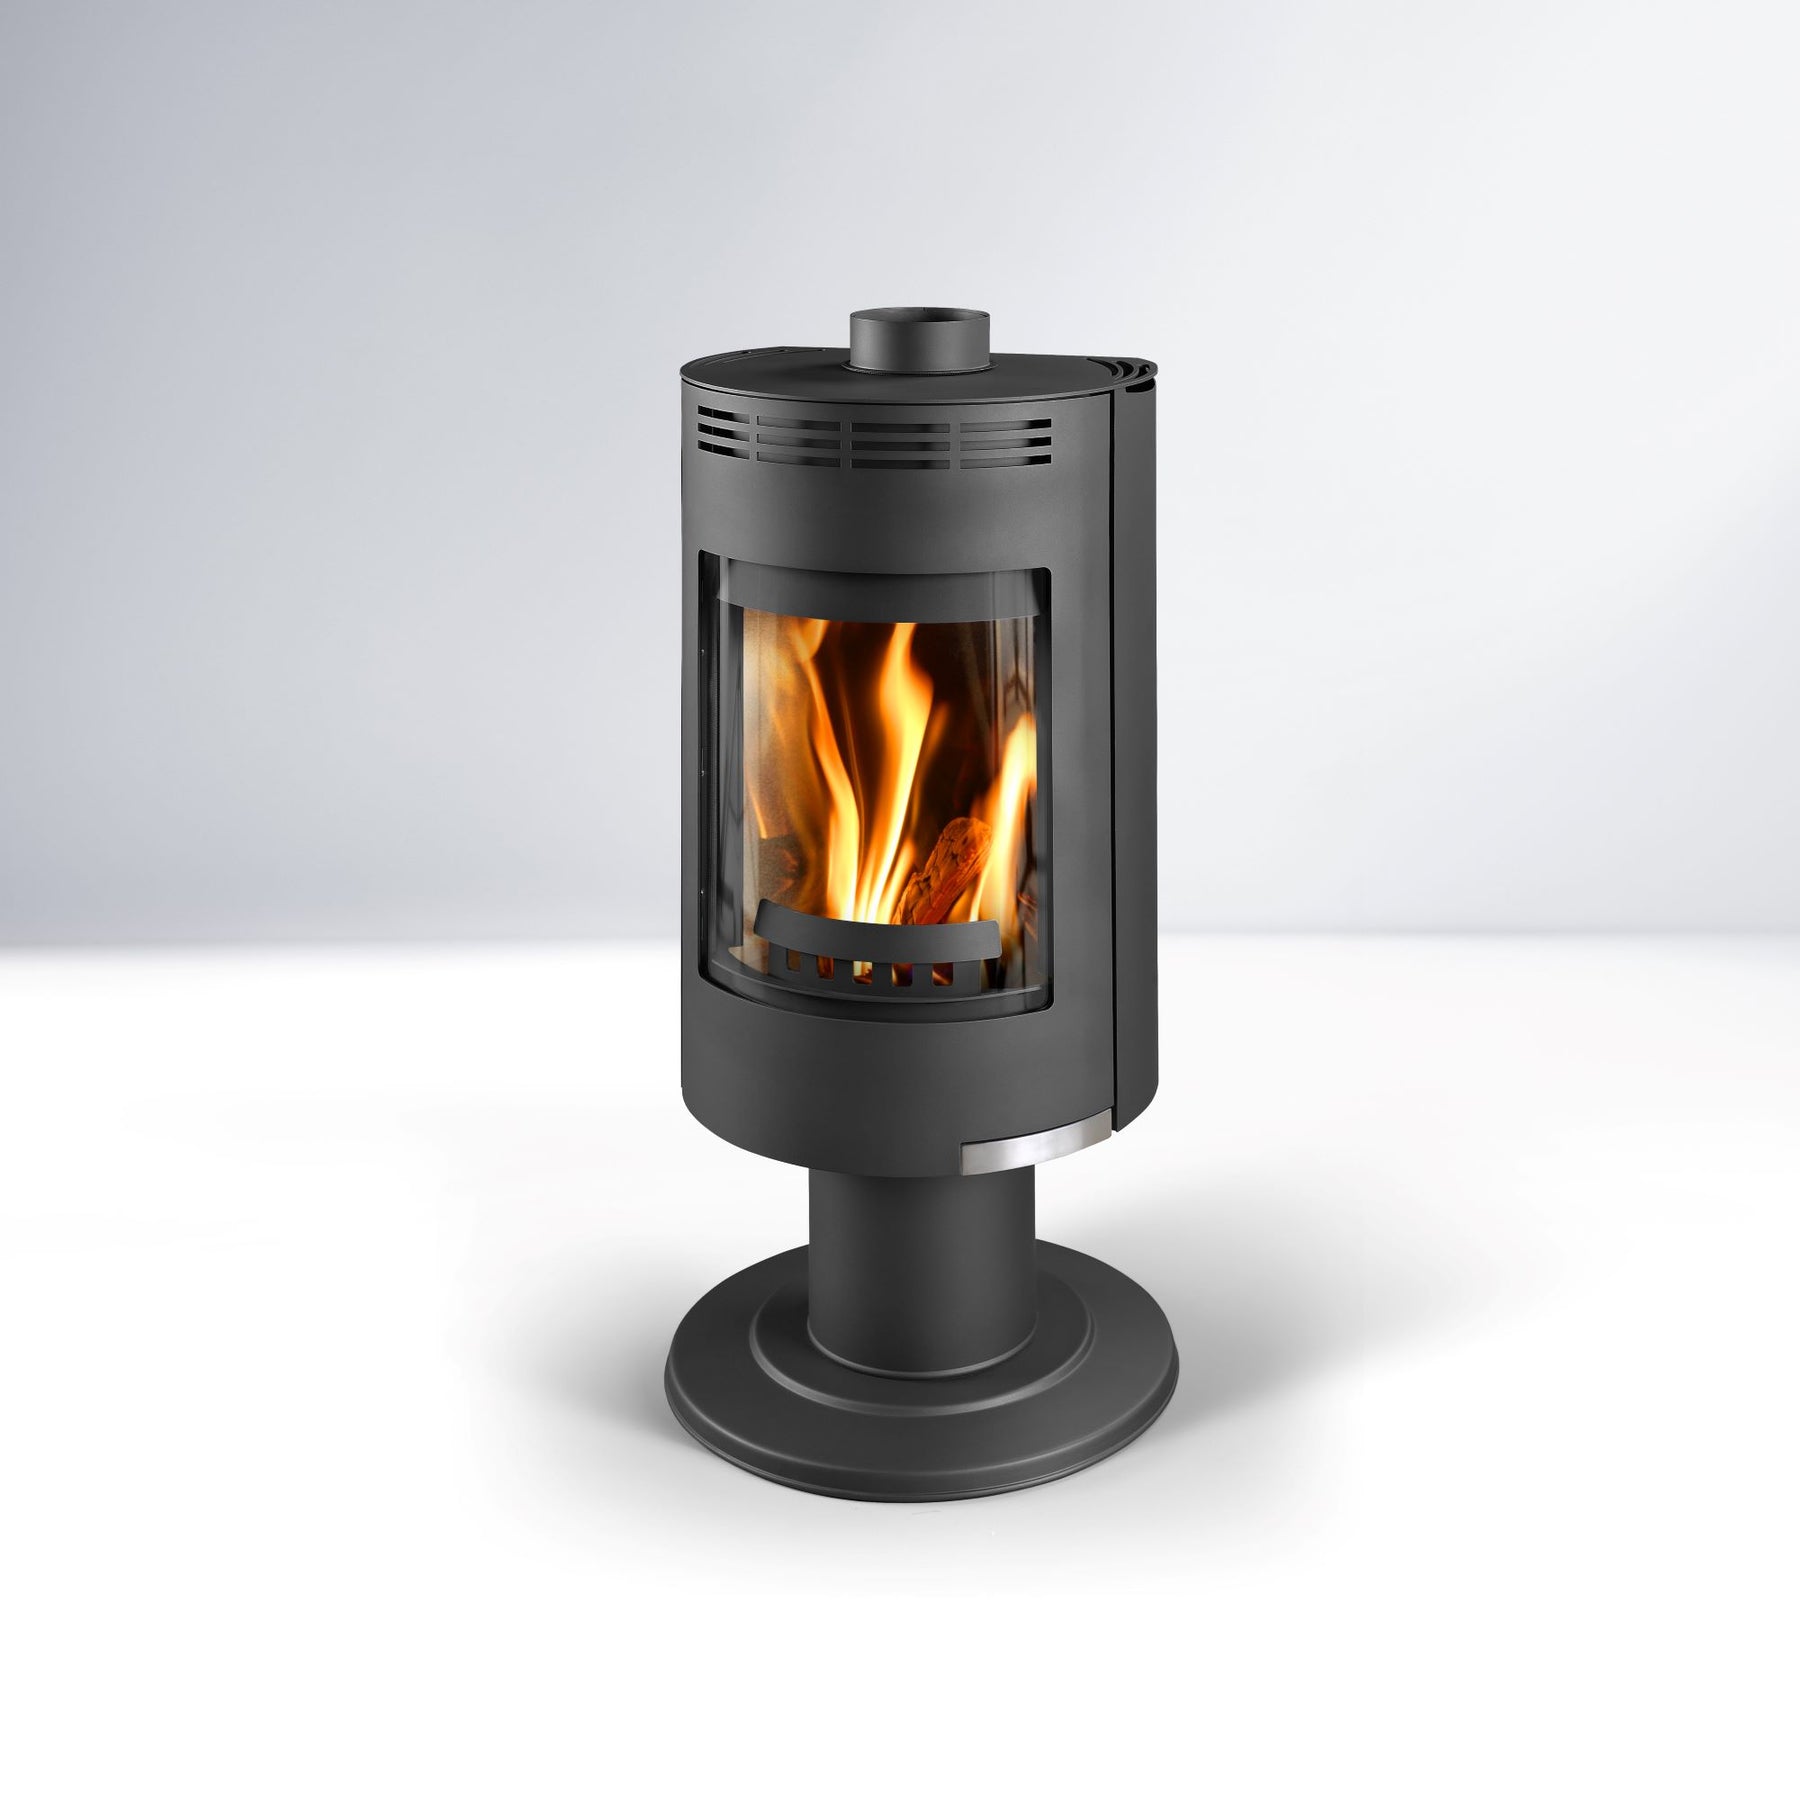 The importance of using properly dried wood in a multi-fuel stove.